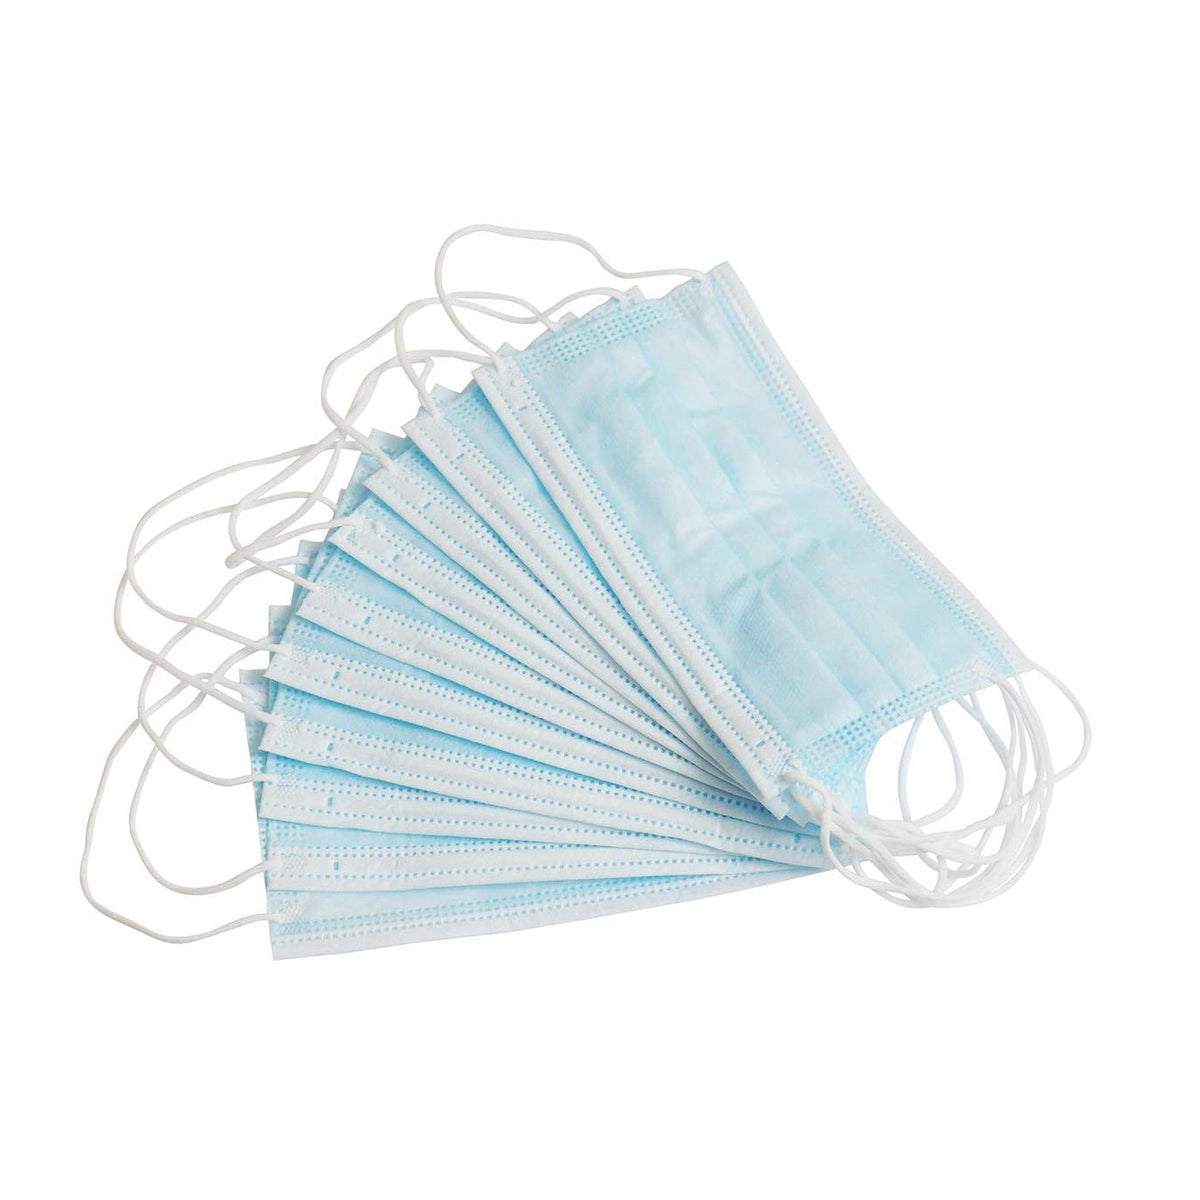 HOSLEY®  Disposable Medical Face-Mask, 50 Pack